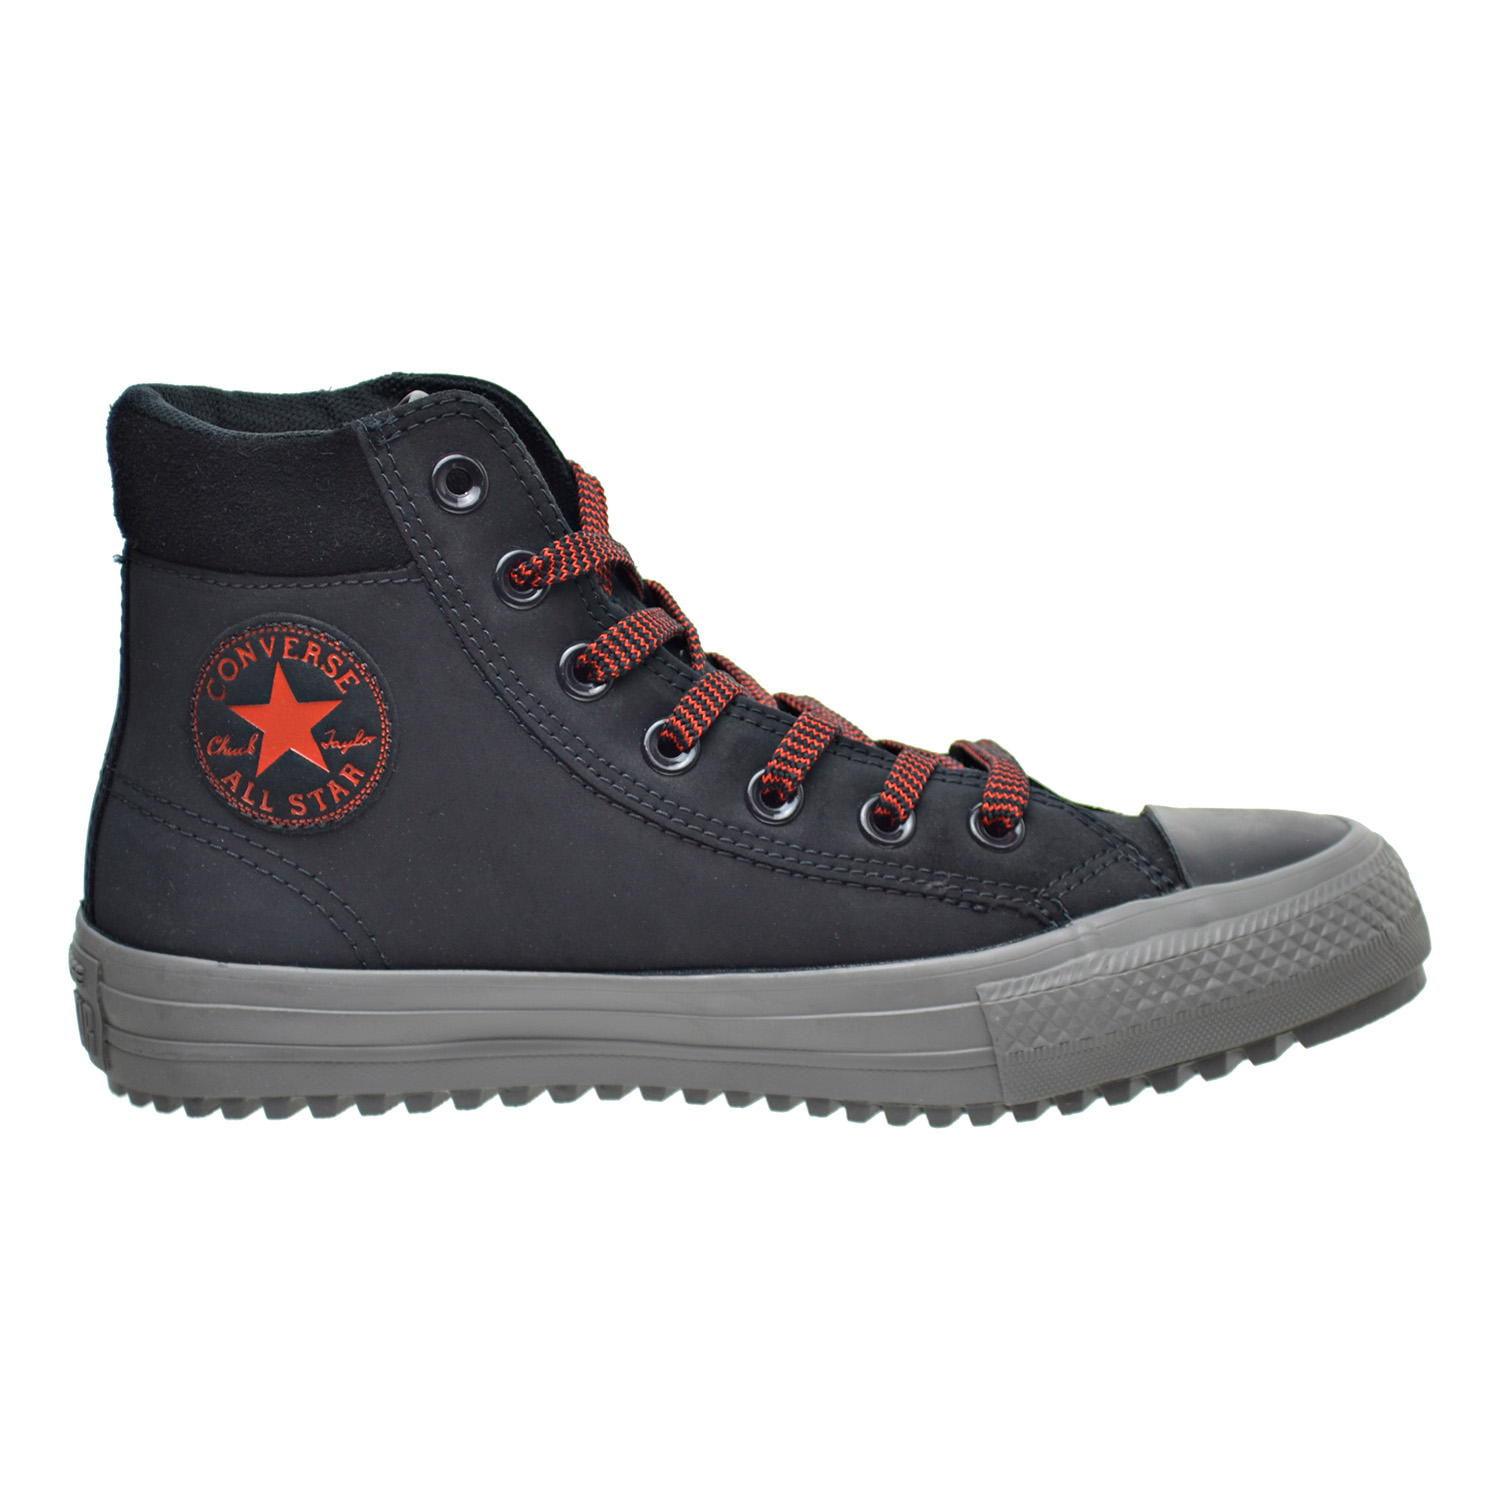 Converse Chuck Taylor All Star PC High Top Unisex Boots Black/Charcoal Grey/Signal Red 153672c - image 1 of 6